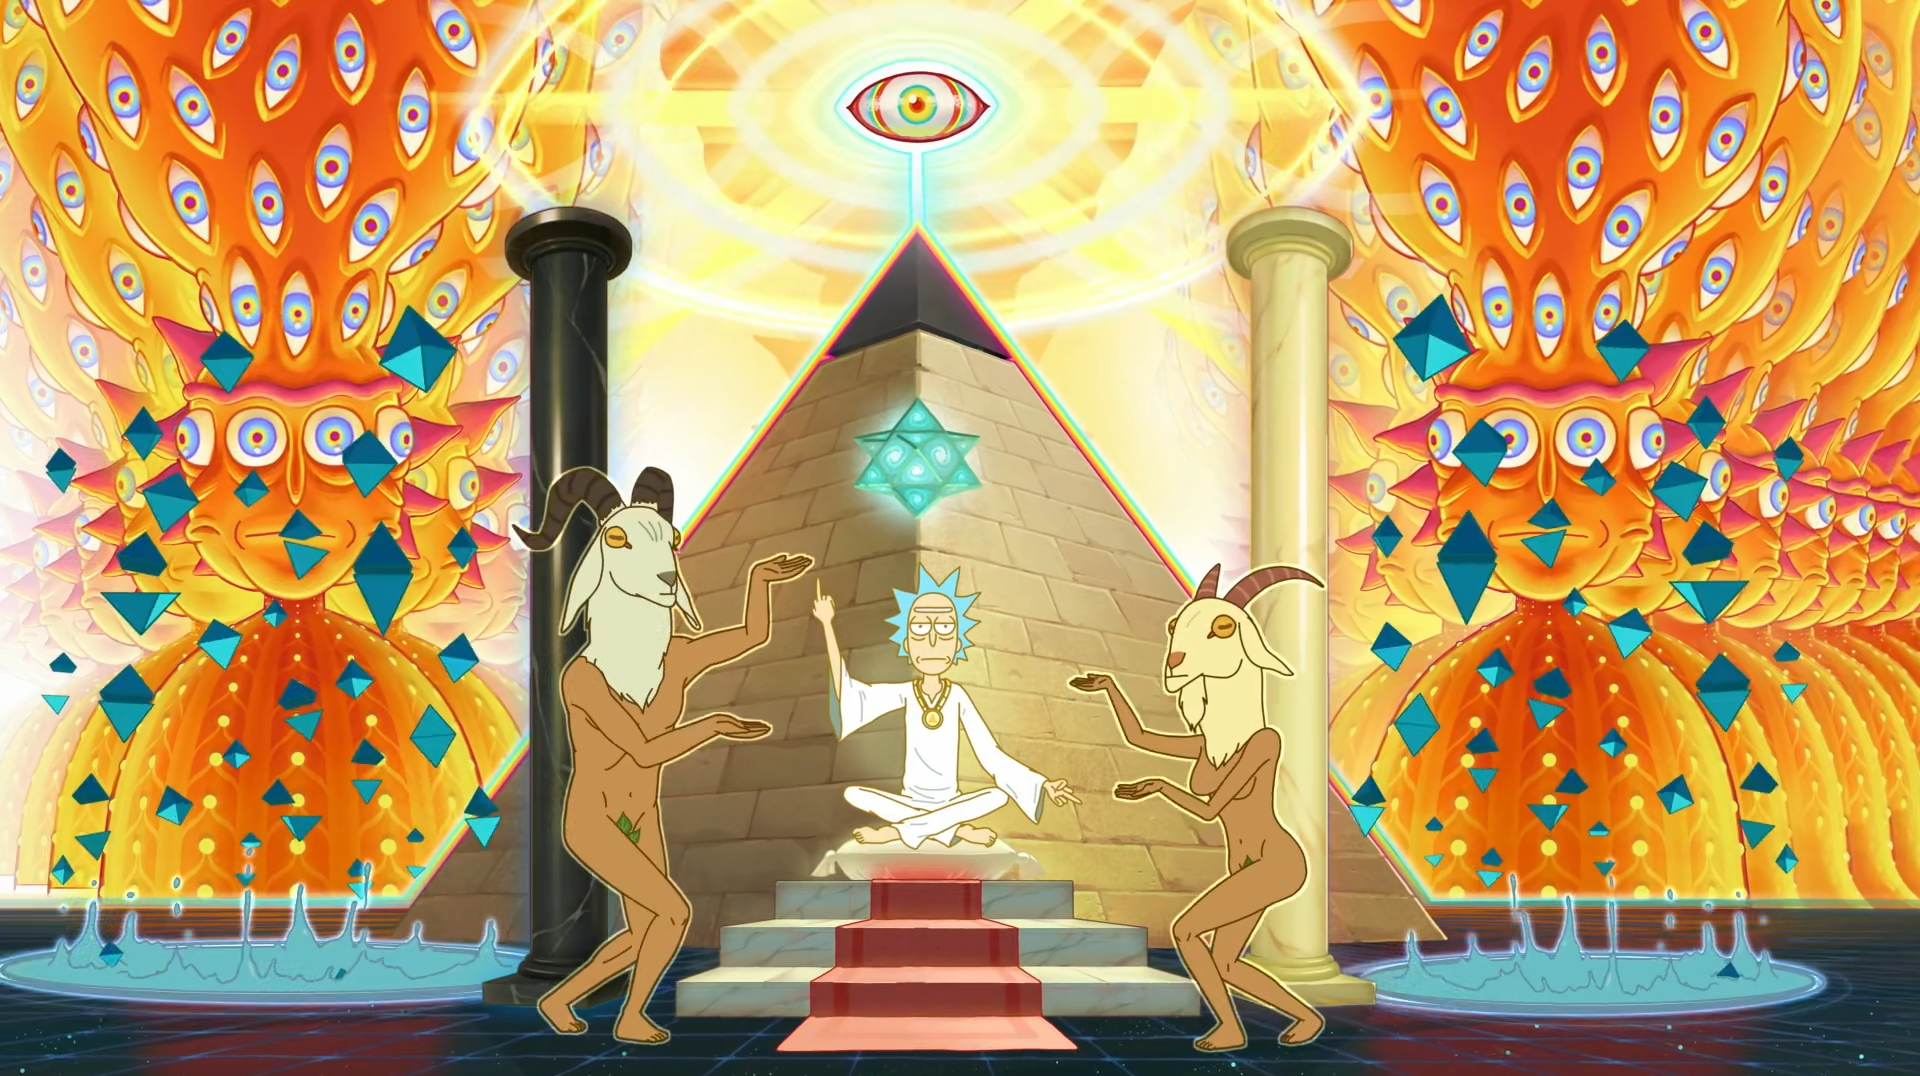 General 1920x1076 Rick and Morty psychedelic strategic covering pyramid cartoon